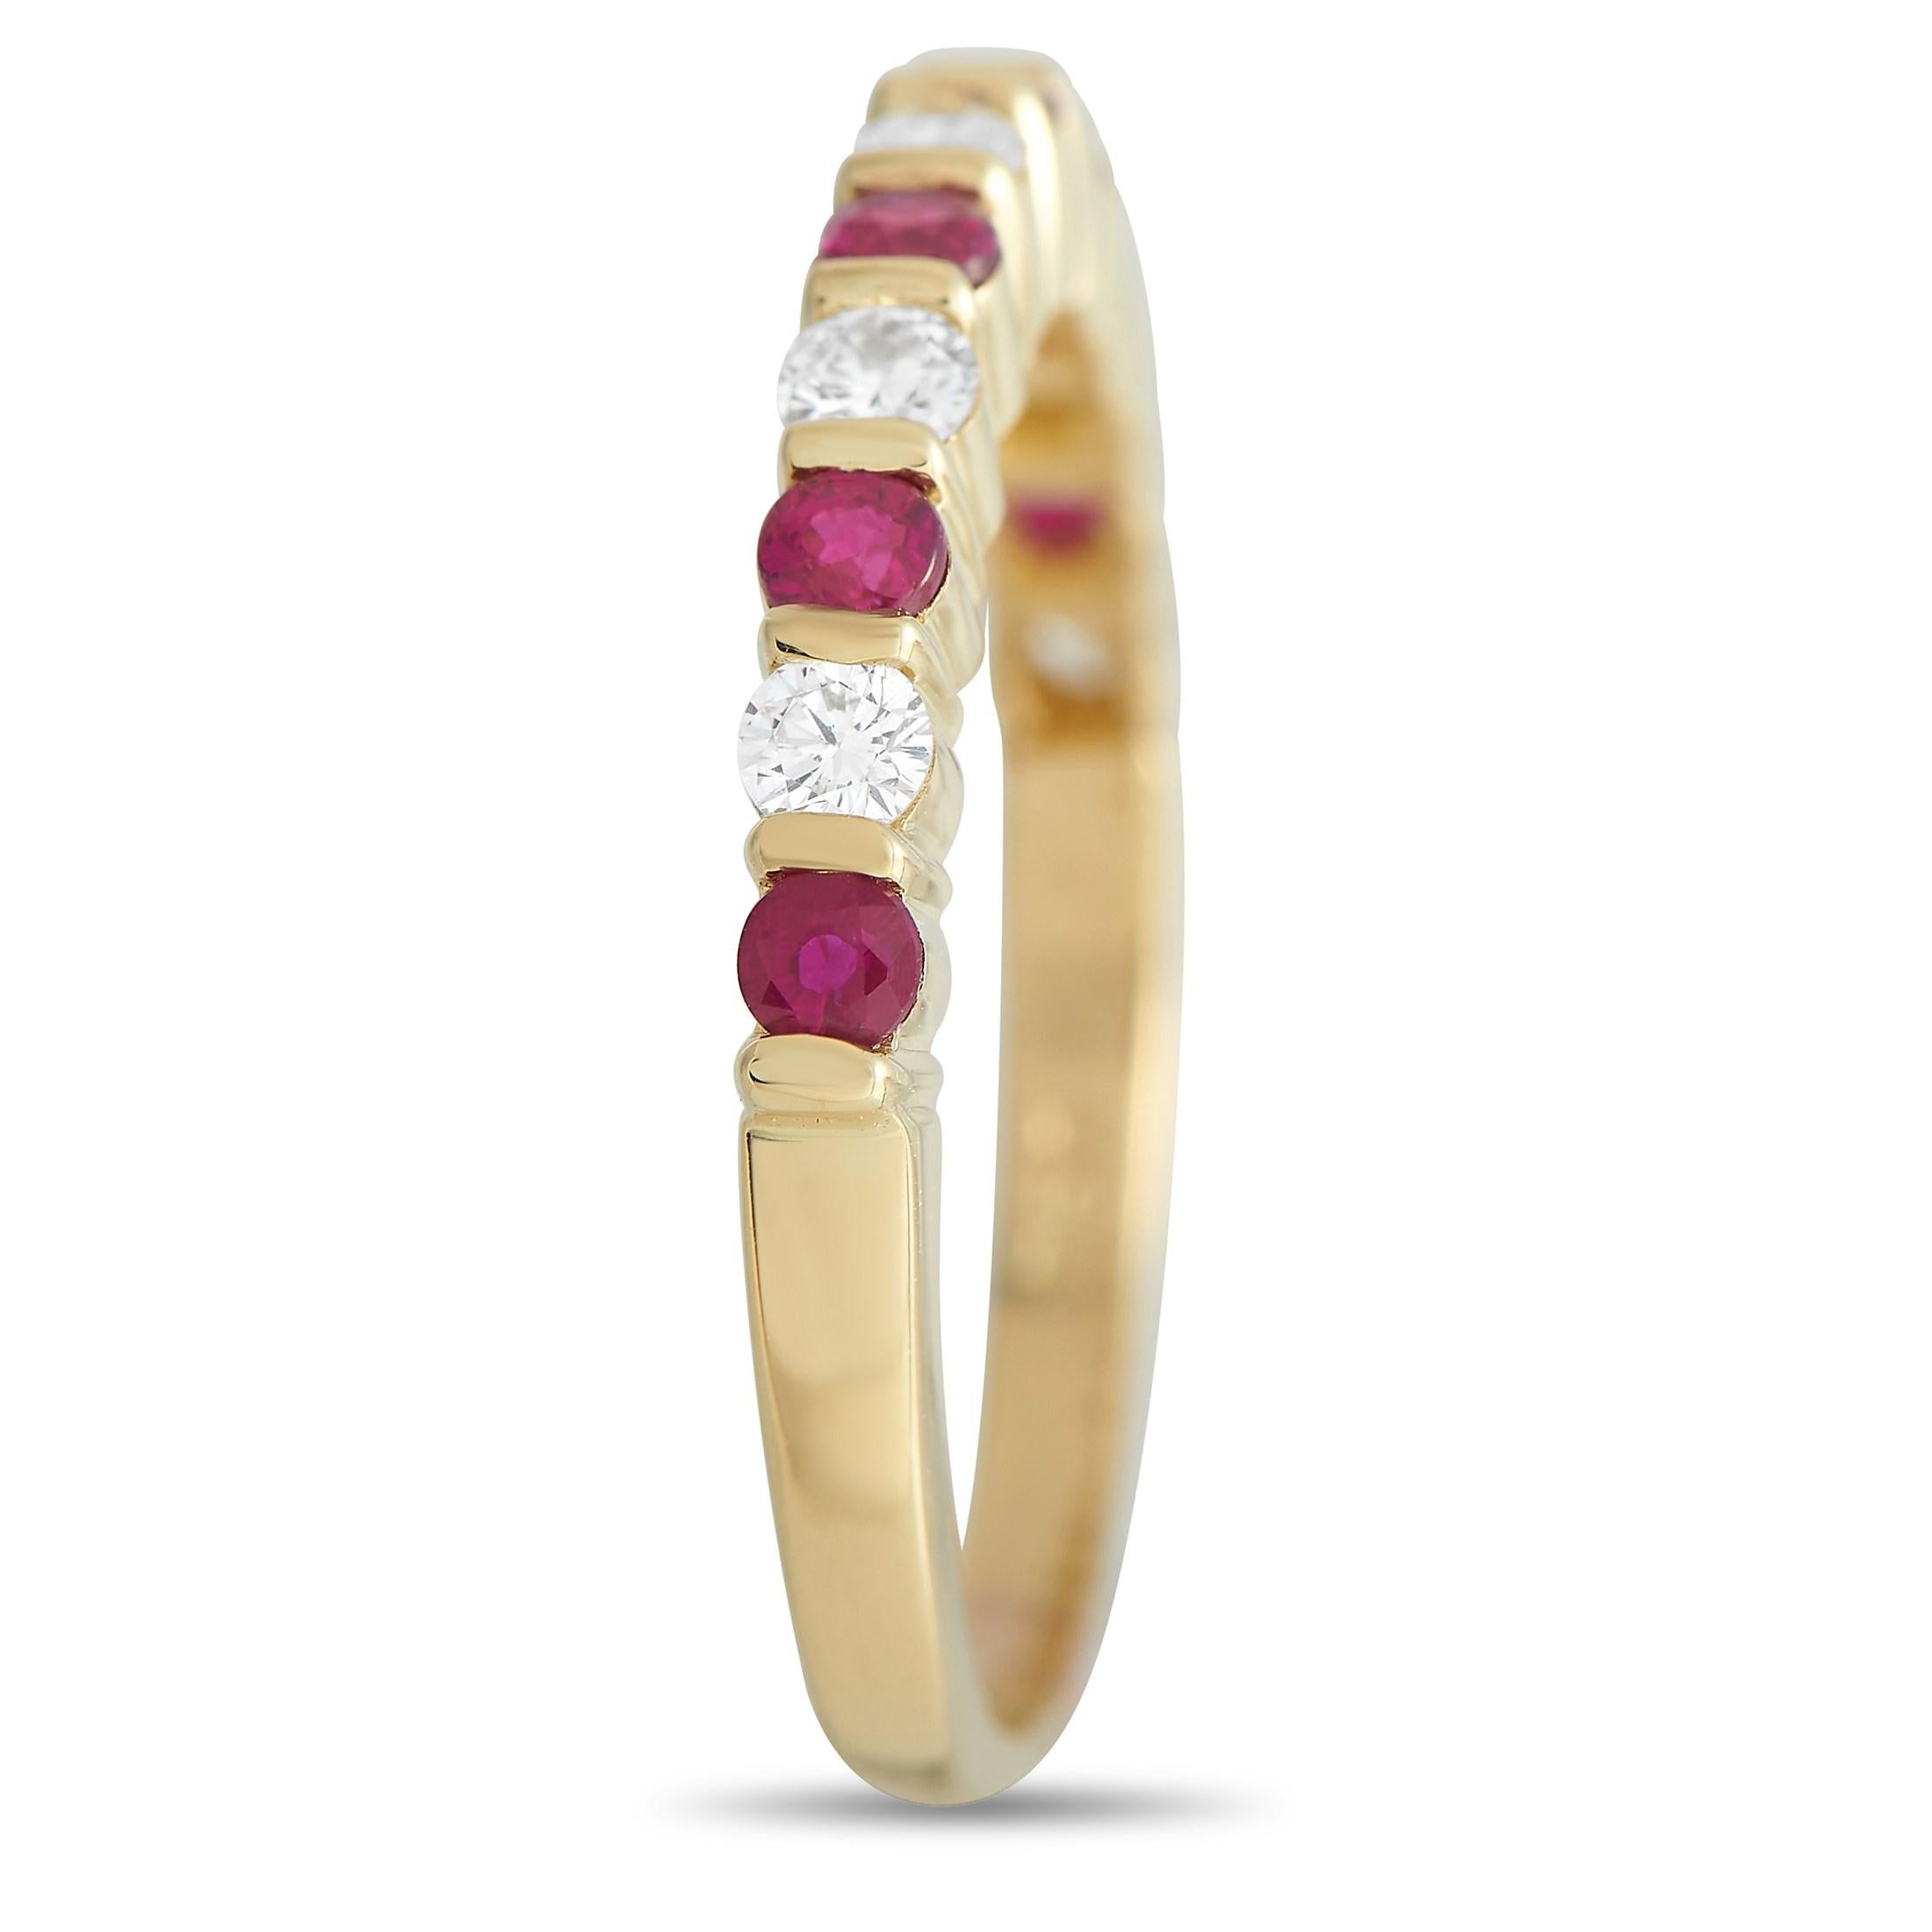 A simple 18K Yellow Gold setting beautifully showcases a series of sparkling gemstones on this timeless ring from Tiffany & Co. Round-cut Diamonds totaling 0.20 carats alternate between round-cut Rubies – which together possess a total weight of